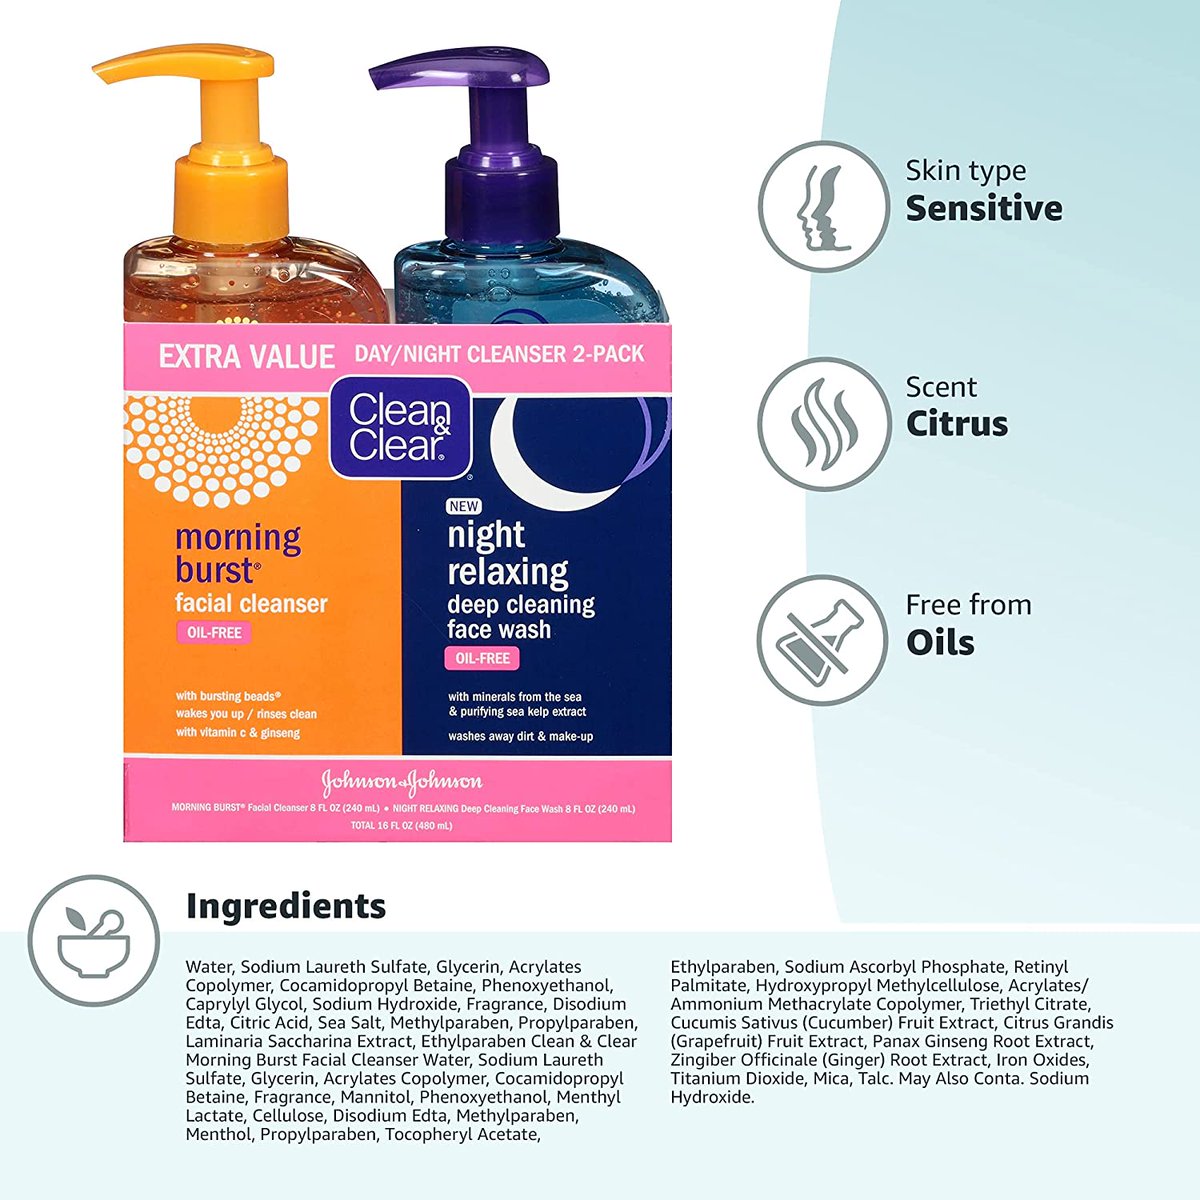 Clean & Clear 2-Pack Day and Night Face Cleansers with Citrus Morning Burst Facial Cleanser with Vitamin C & Relaxing Night Facial Cleanser with Sea Minerals, 
Product Link: amzn.to/3Eitymk

#cleanser #cleansers #facilacleanser #skincareroutine #skincare
#skincareoftheday